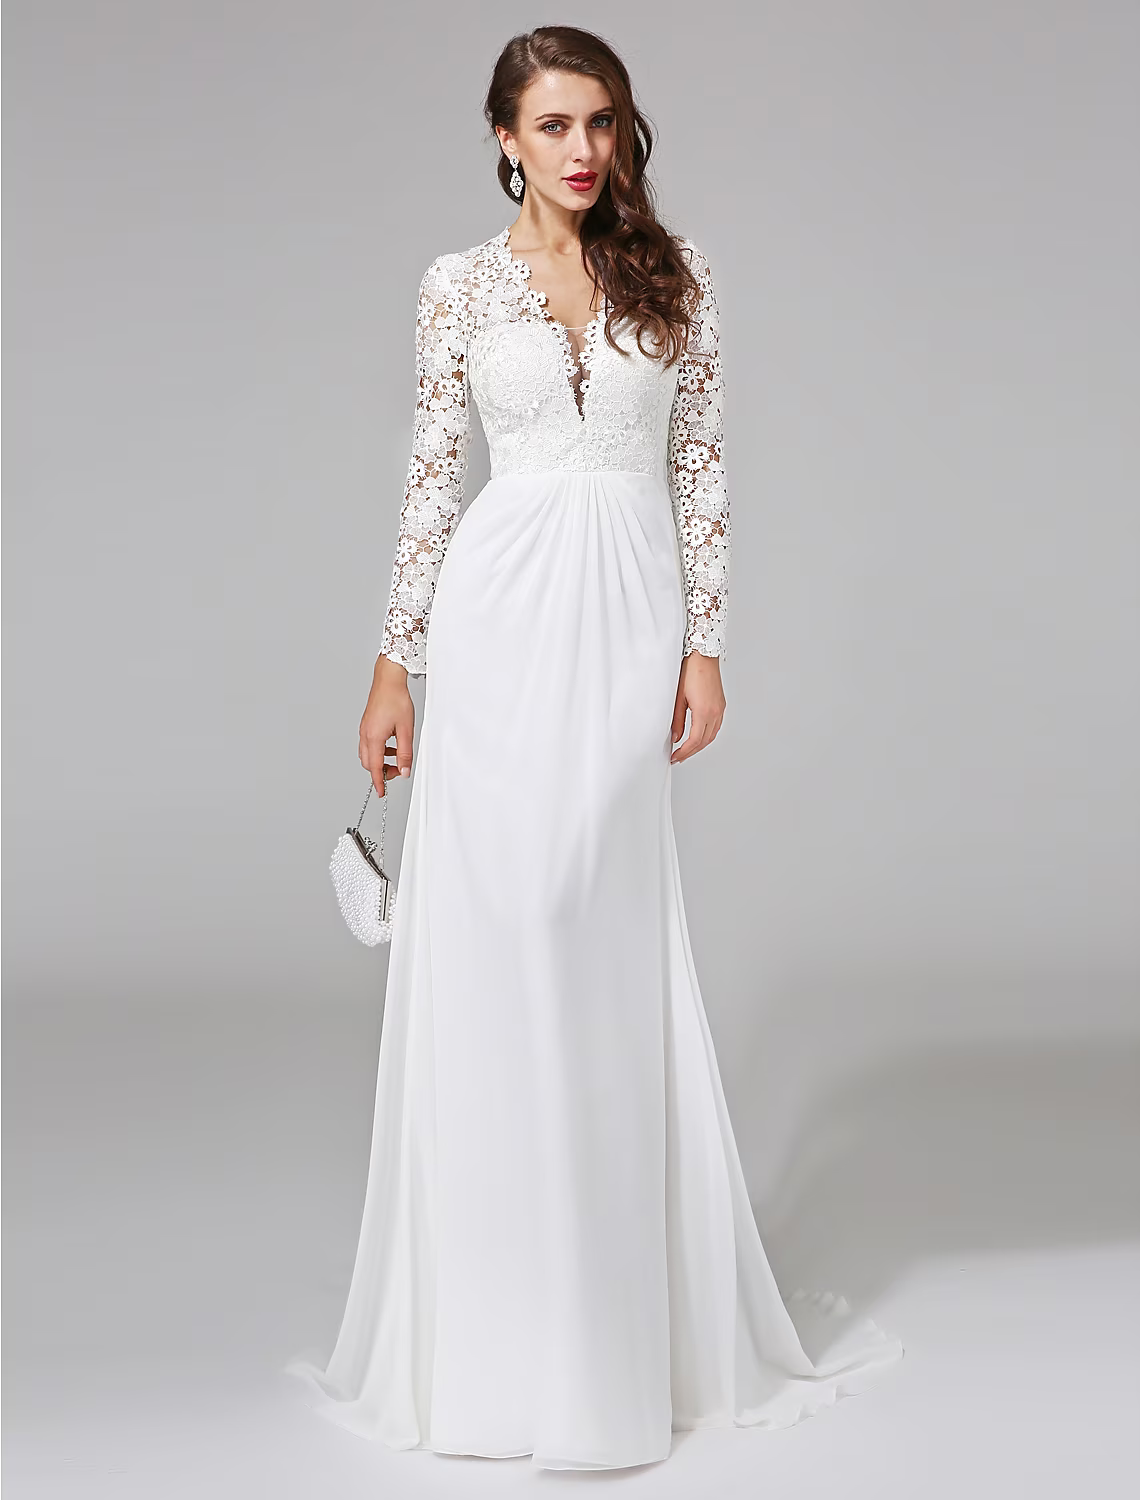 Beach Royal Style Wedding Dresses Long Sleeve V Neck Chiffon With Lace Button